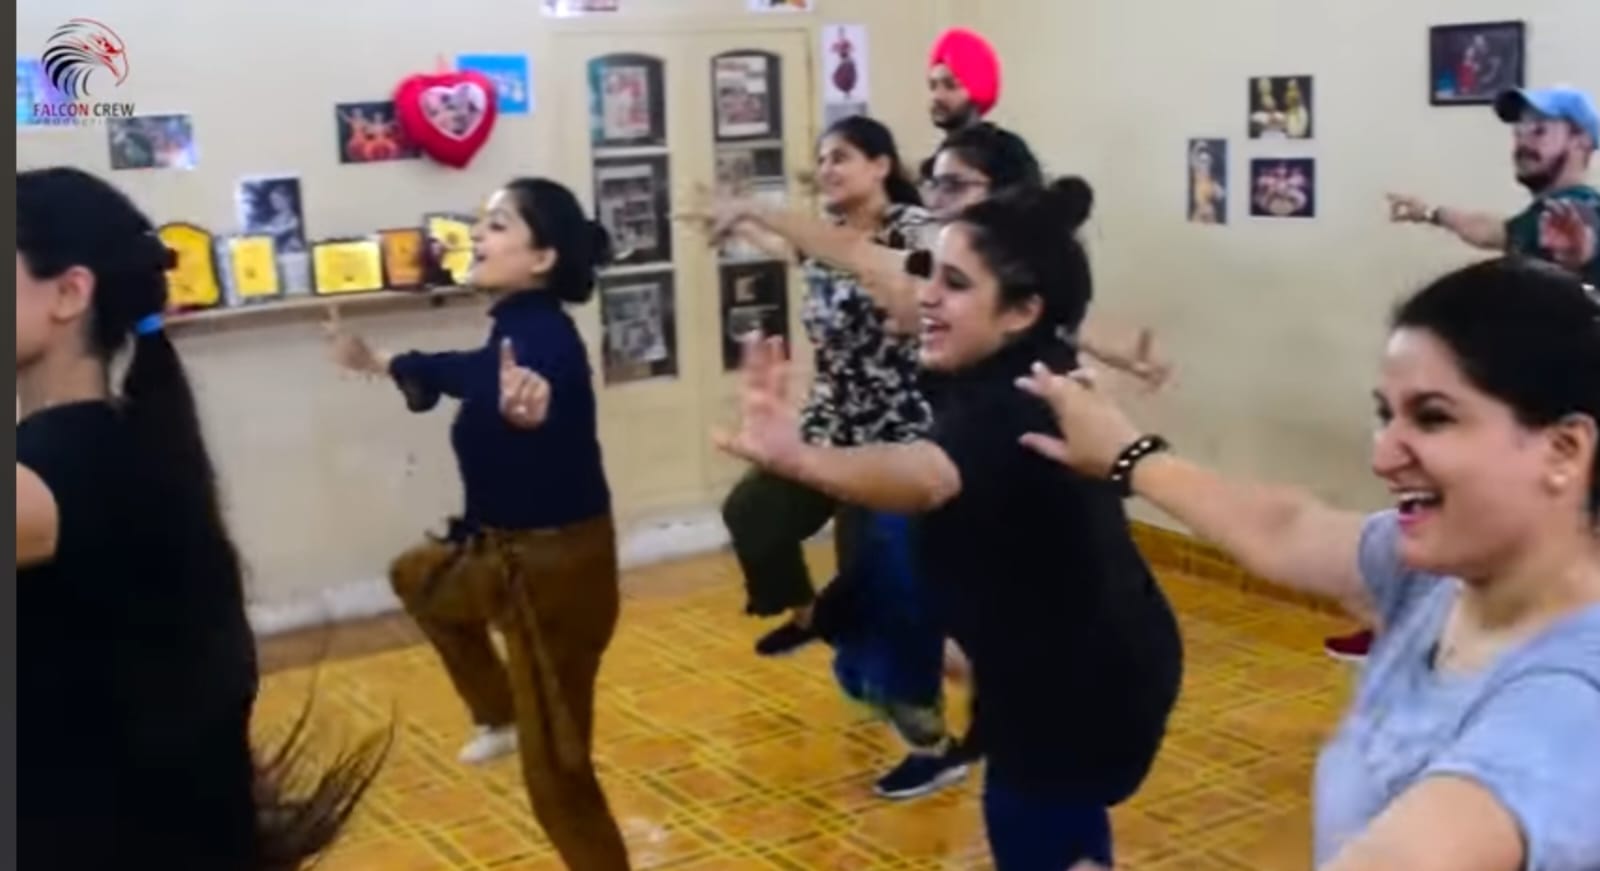 adults dance fitness class bollywood